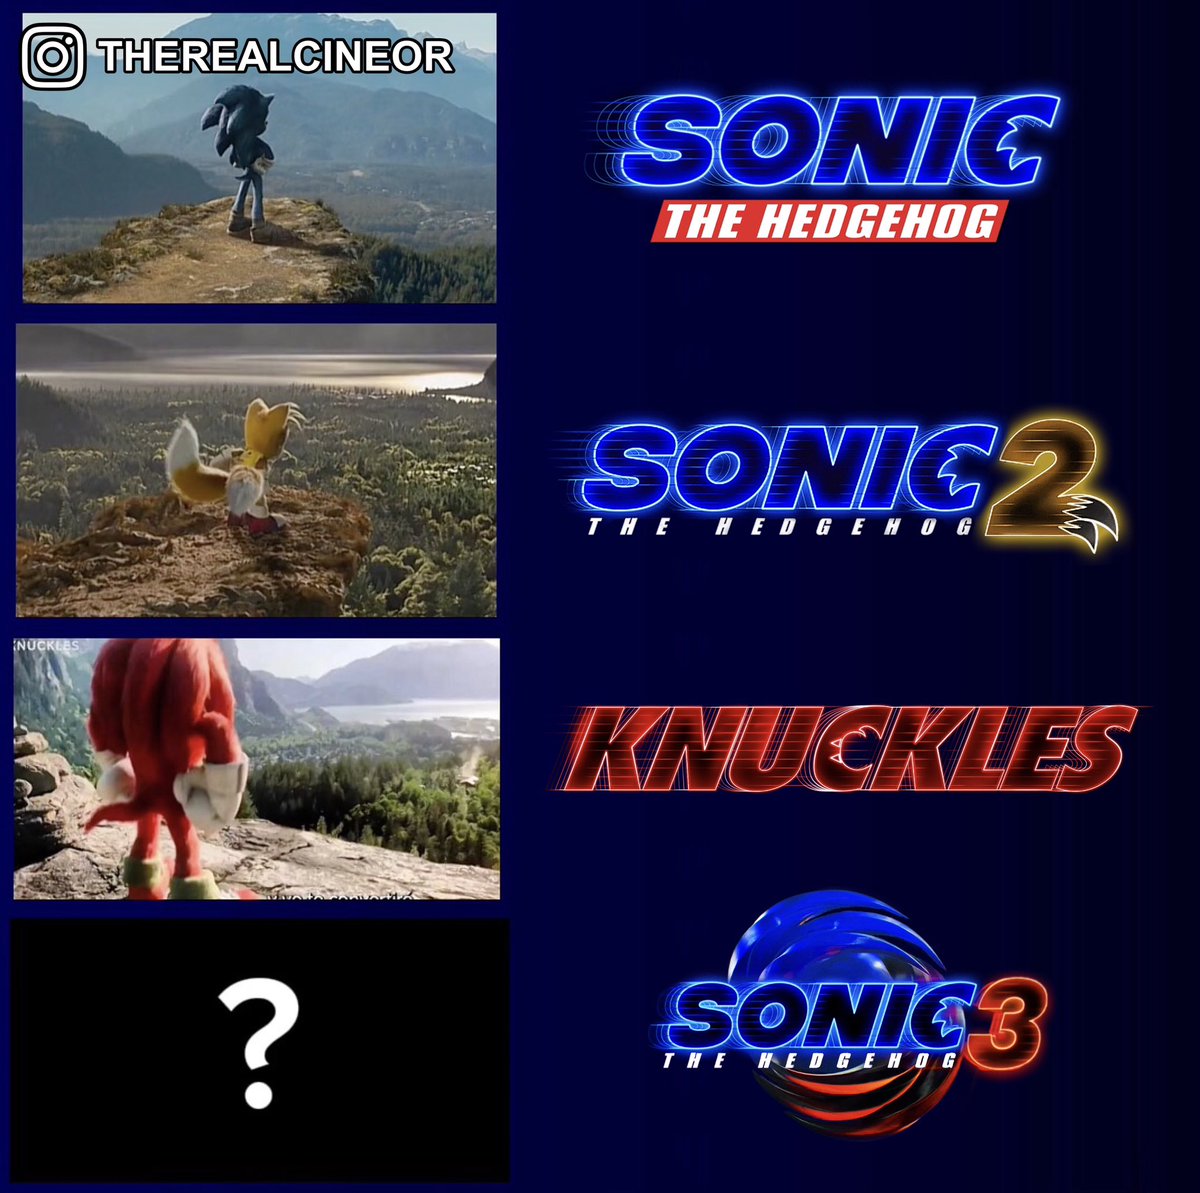 I think we all know what could be the most obvious thing to see in #sonicmovie3 👀⏳🖤❤️🖤🌉🦔

#SonicTheHedeghog #sonic3 #sonicmovie #SonicNews #ShadowTheHedgehog #knuckles #TailsTheFox #paramount